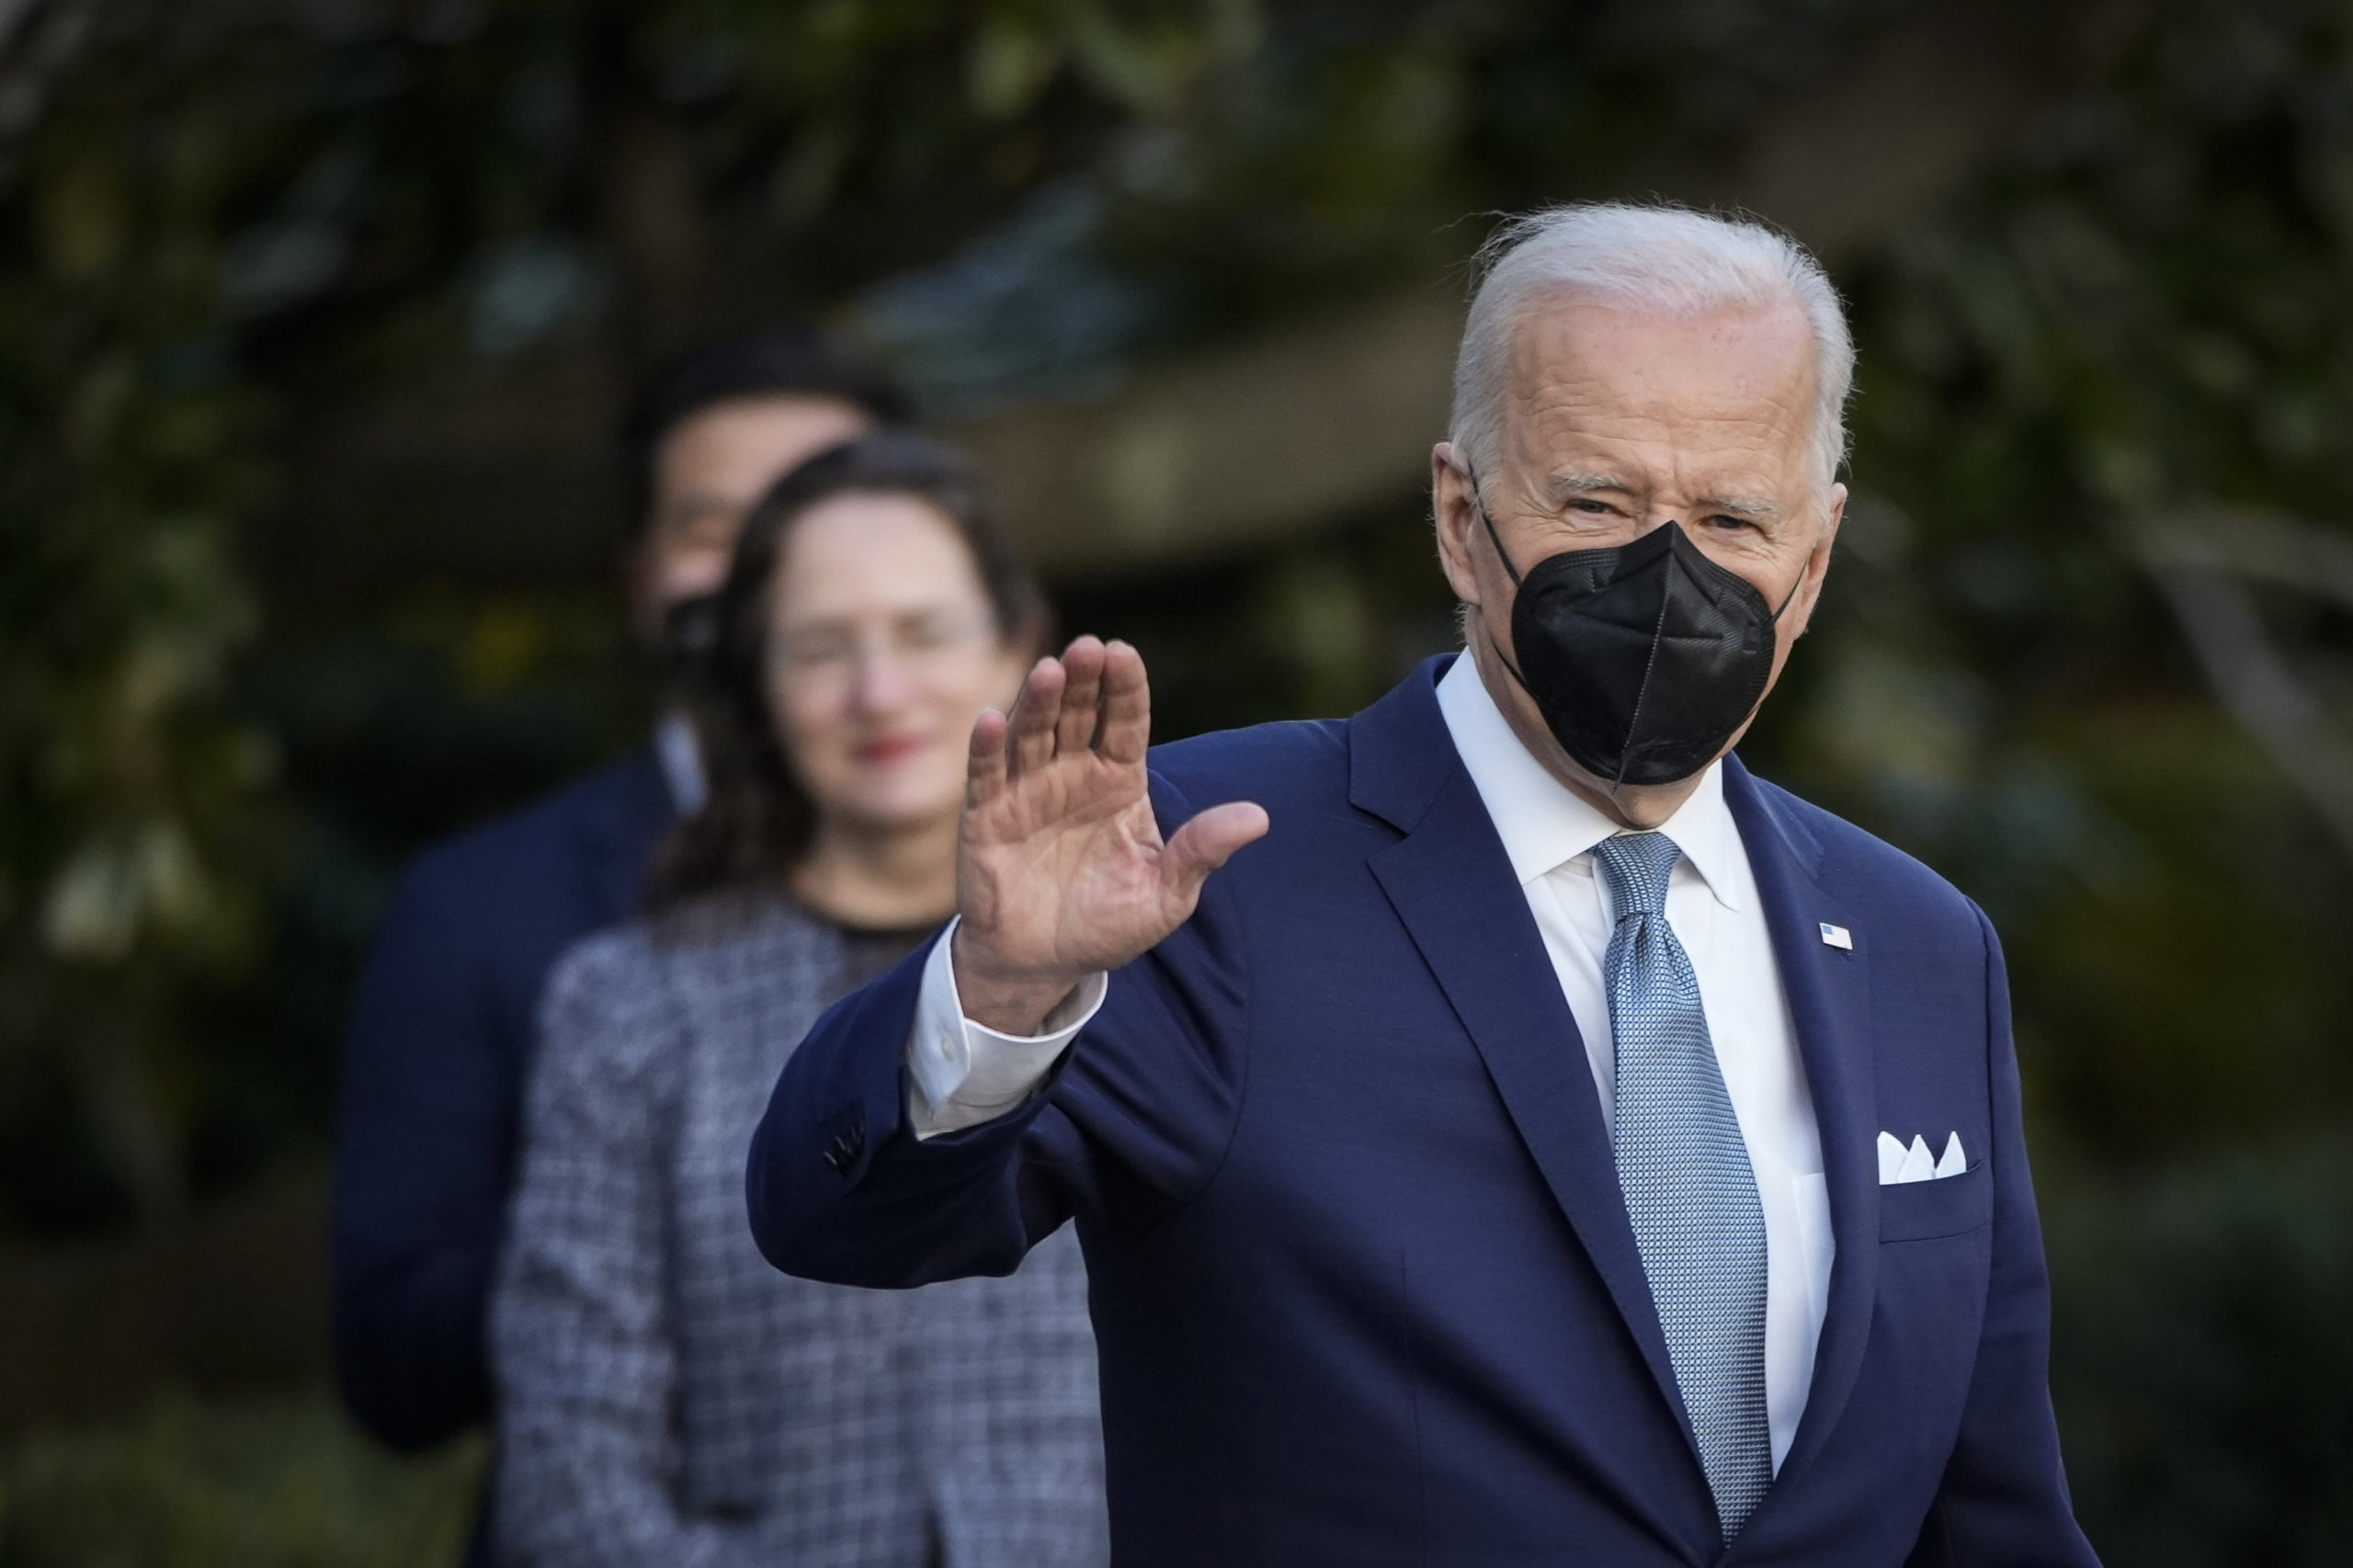 WASHINGTON, DC - FEBRUARY 25: U.S. President Joe Biden waves as he walks to Marine One on the South Lawn of the White House February 25, 2022 in Washington, DC. President Biden is traveling to Wilmington, Delaware for the weekend. (Photo by Drew Angerer/Getty Images)